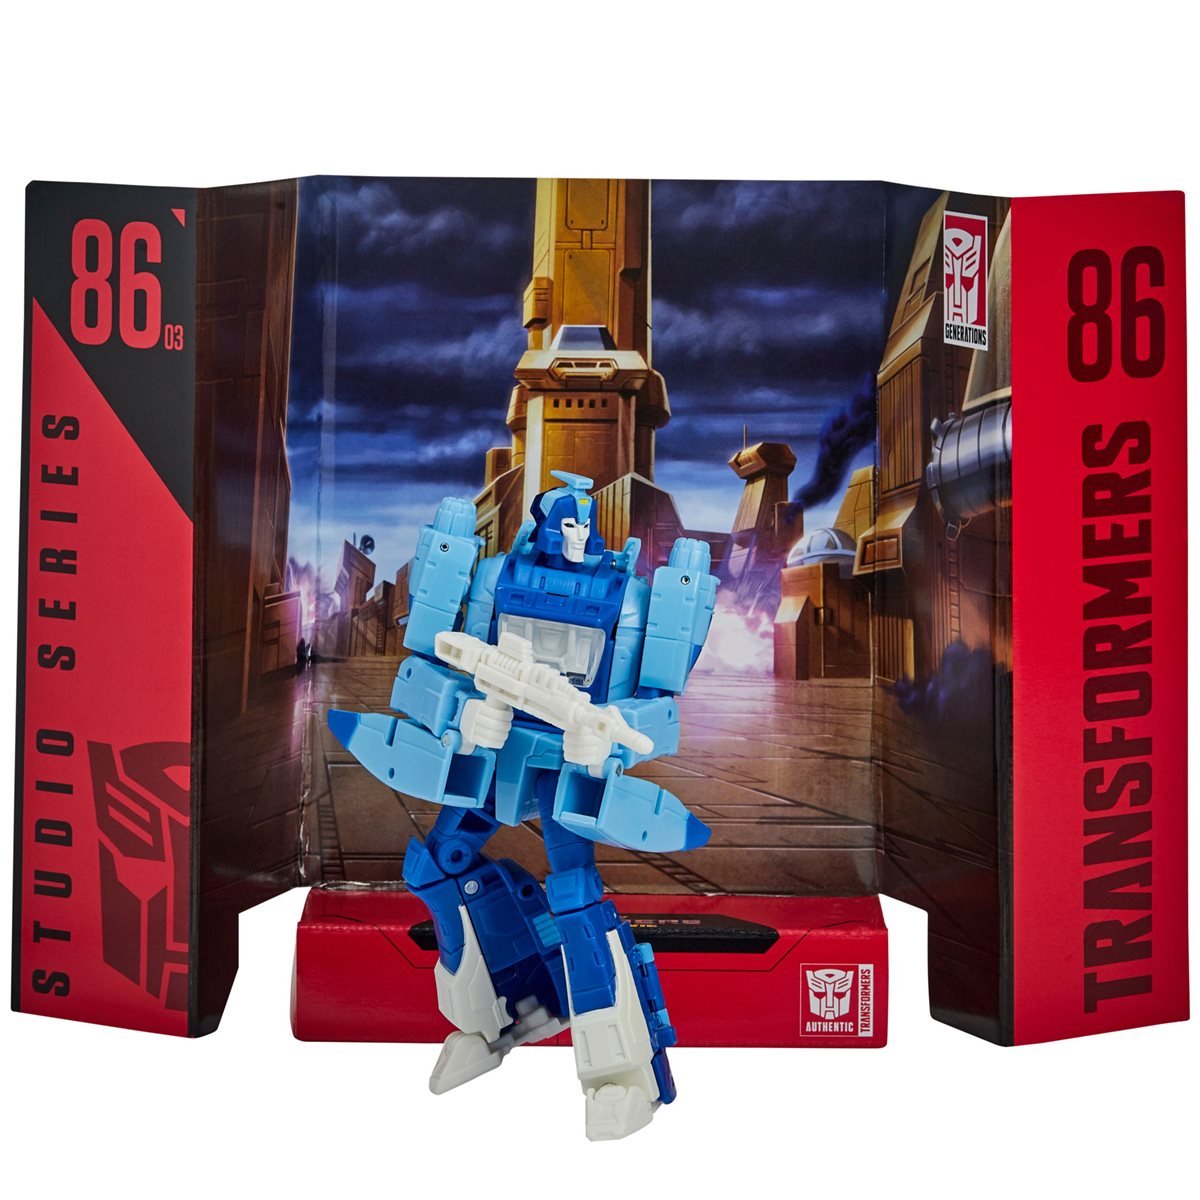 Transformers Studio Series 86-03 Deluxe The Transformers: The Movie Blurr Action Figure